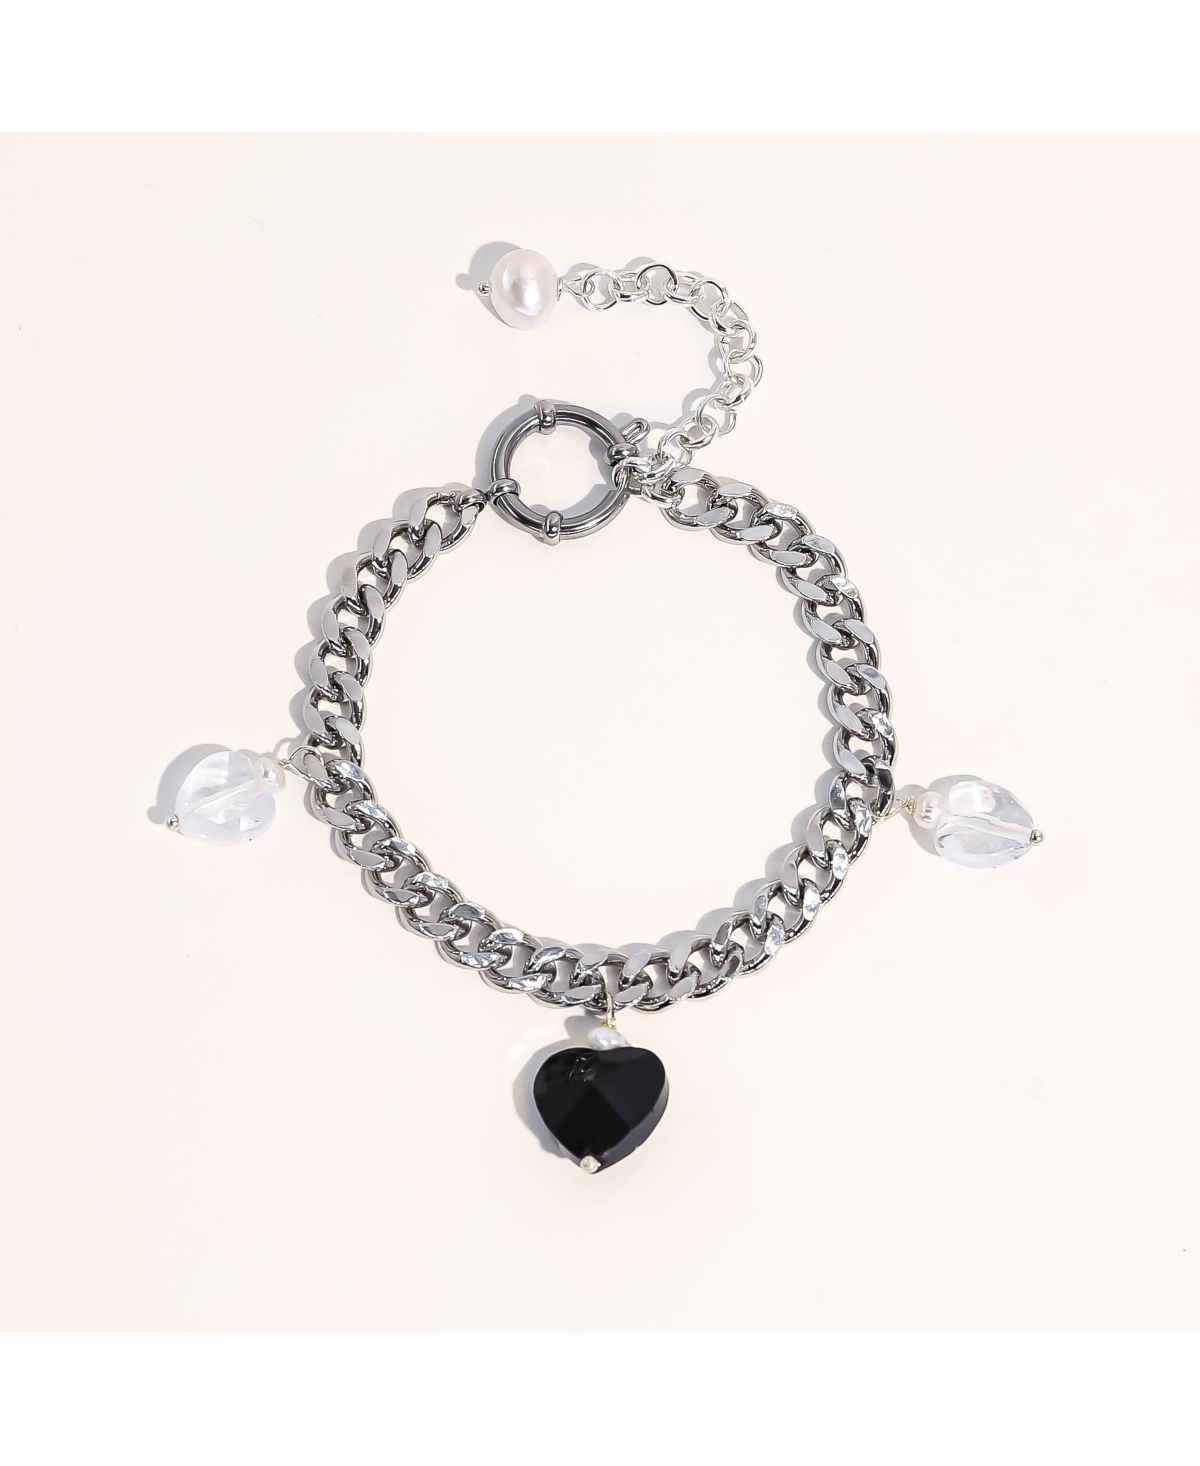 Robyn Black Heart Charm Freshwater Pearl Silver Bracelet For Women - Silver and black